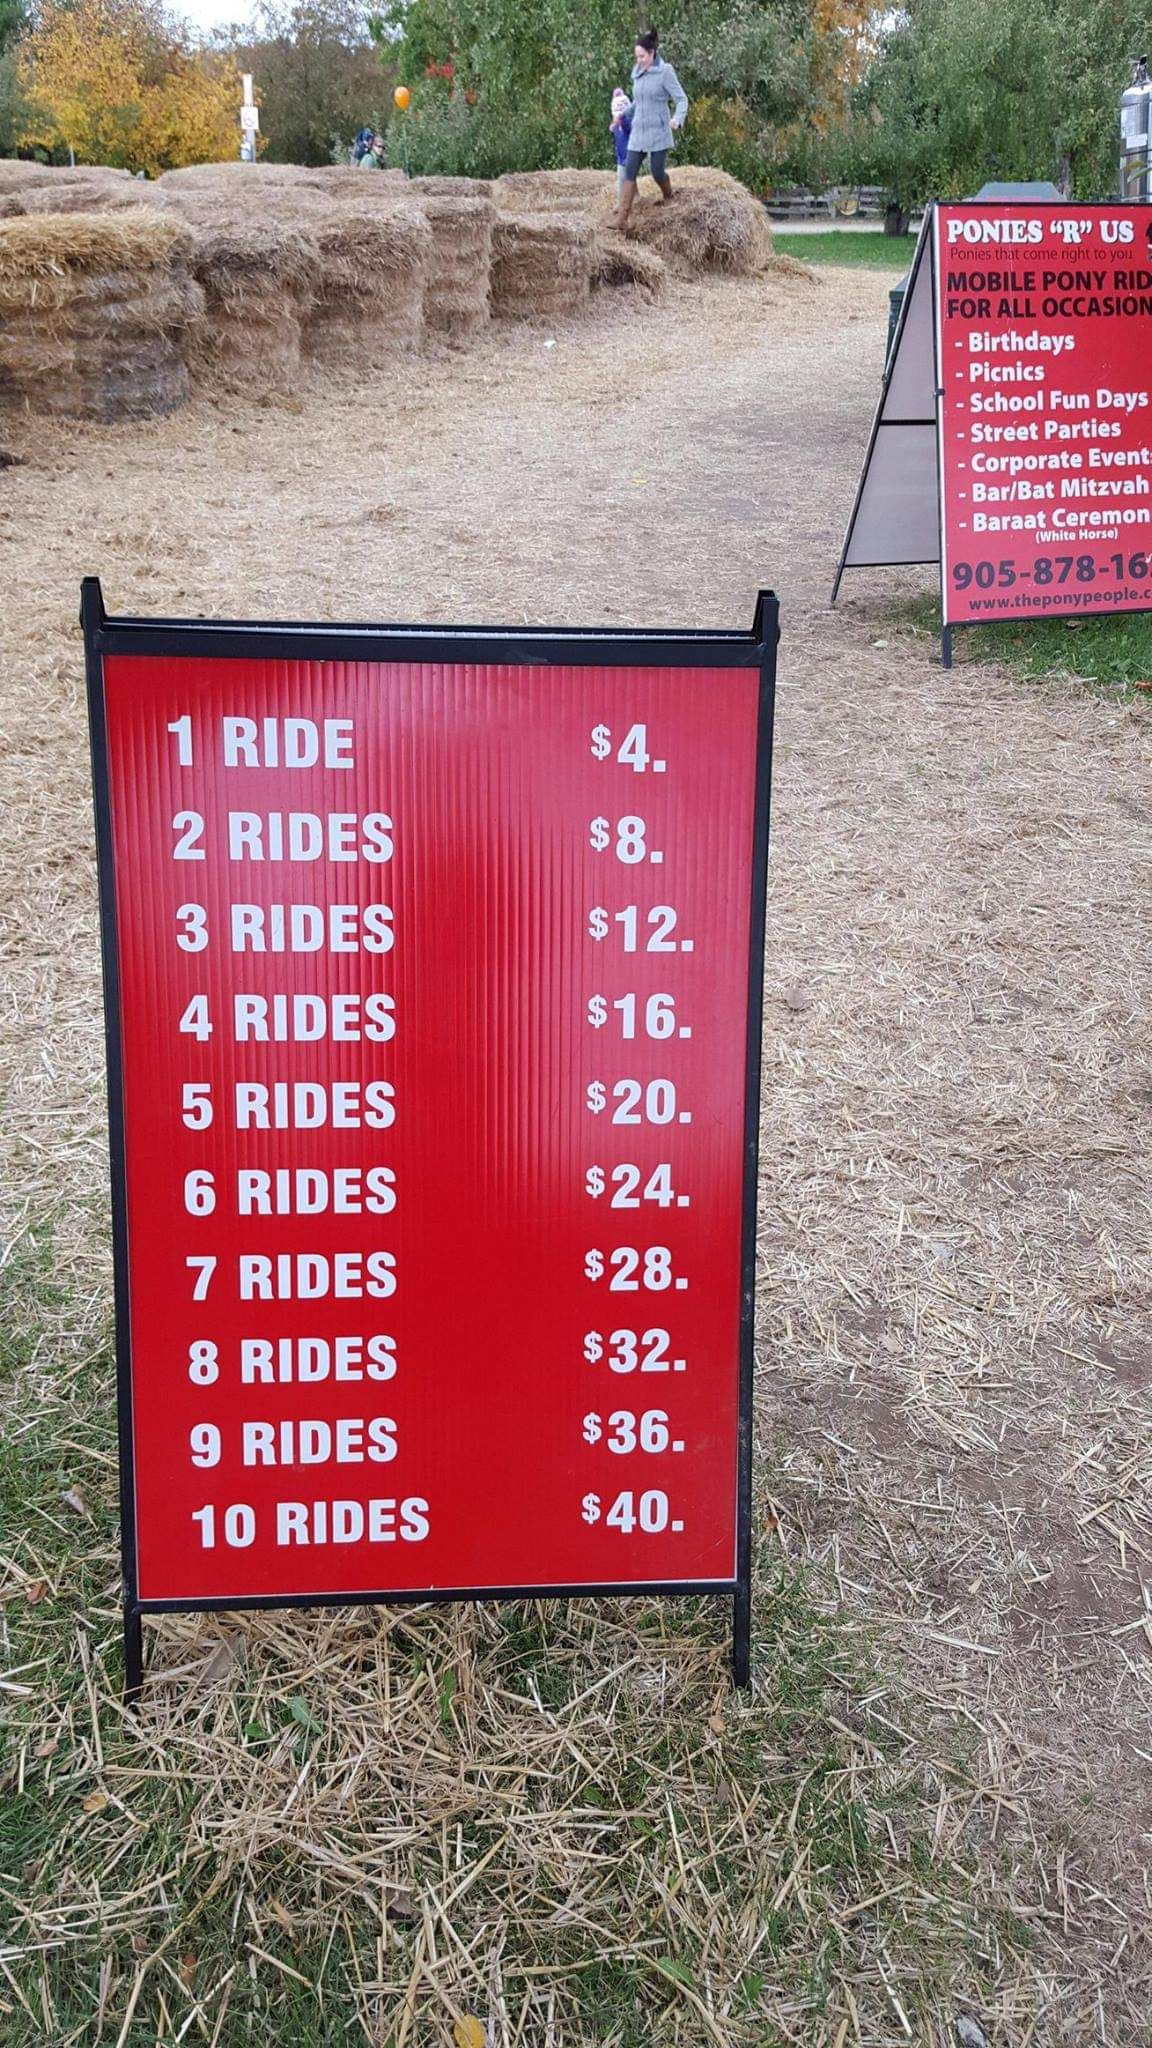 So just $4 a ride then?